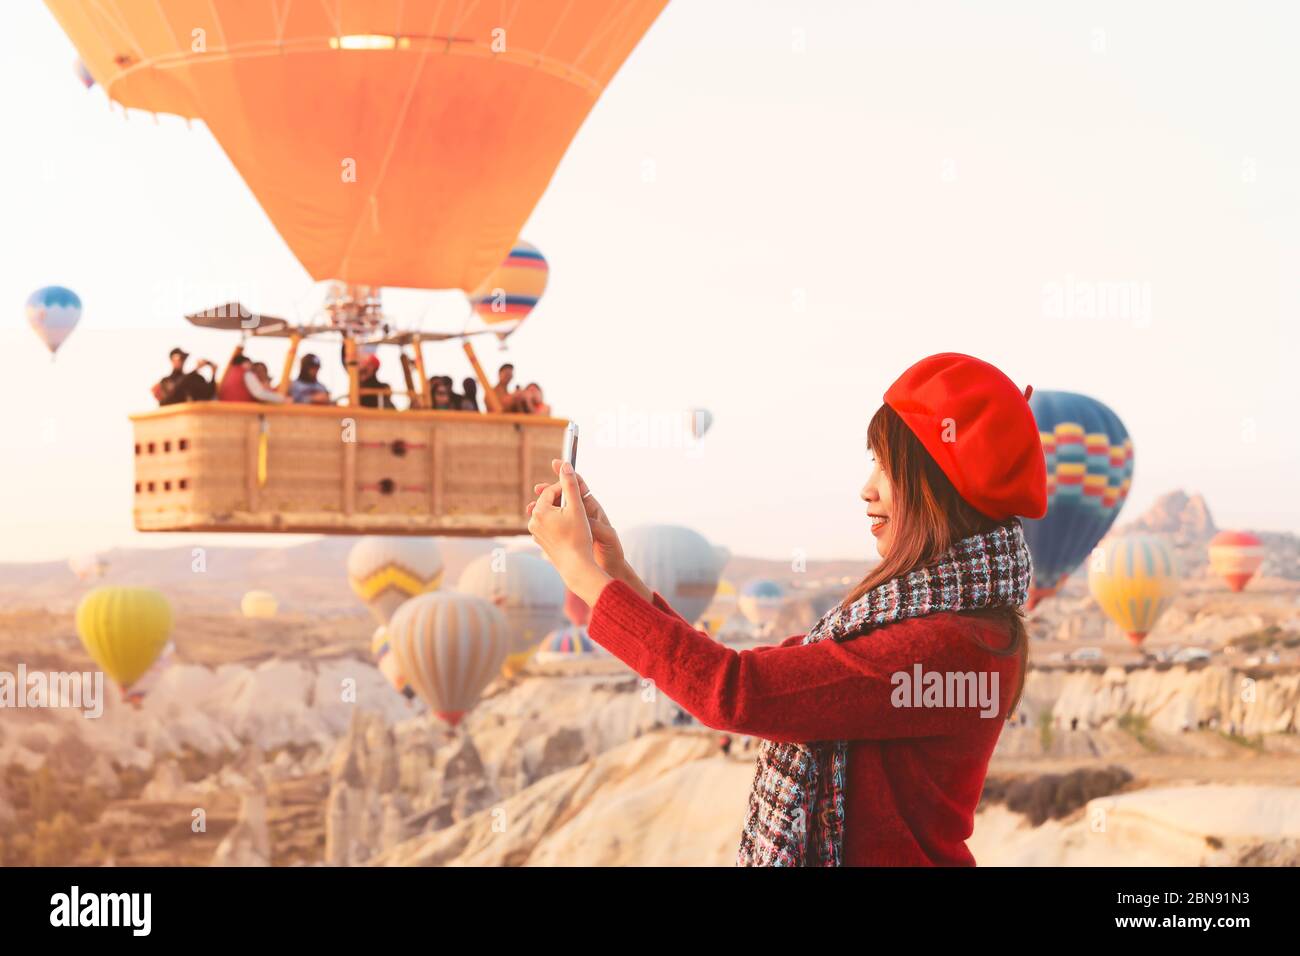 Asain woman enjoy taking pictures of hot air balloons flying over amazing rock landscape in Cappadocia. Stock Photo